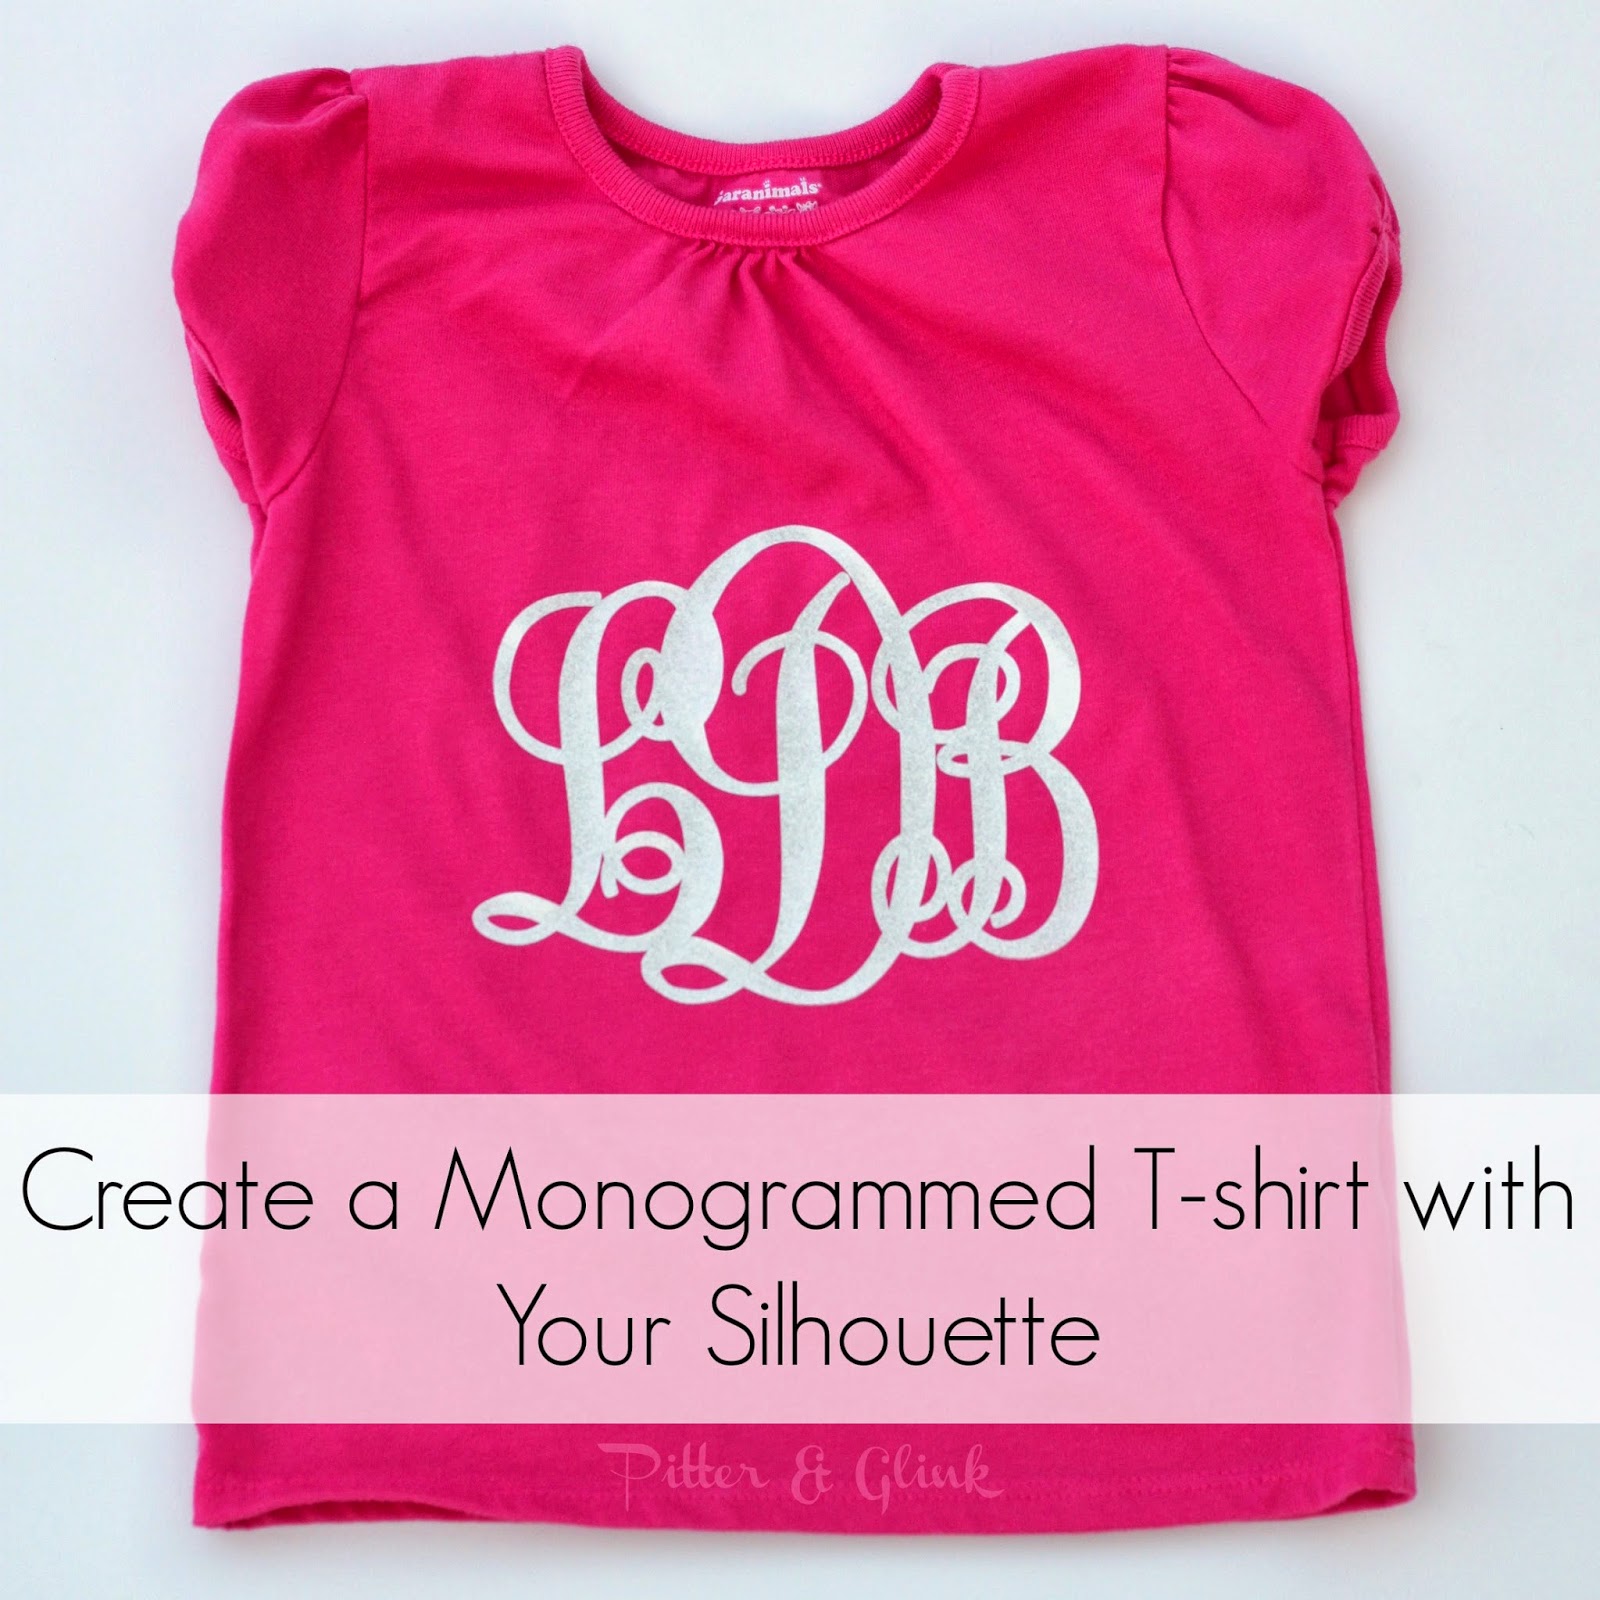 Create a Monogrammed T-shirt with Silhouette Heat Transfer Material: A Tutorial from Pitter and Glink